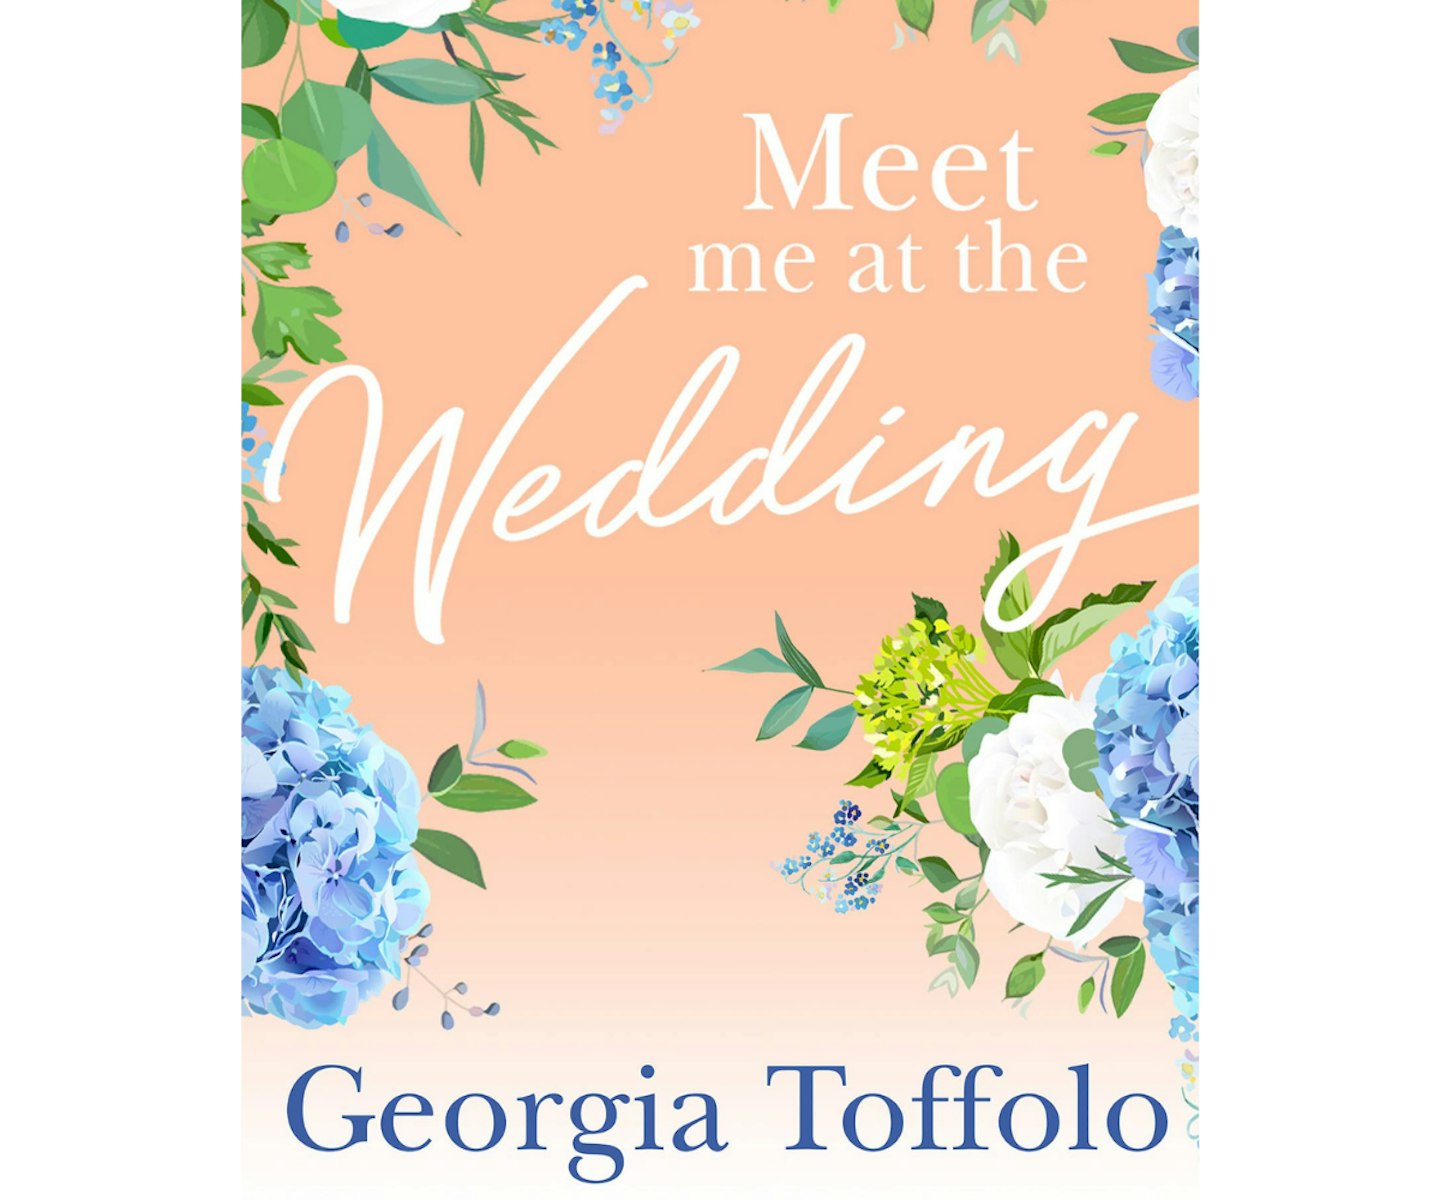 Meet Me At The Wedding by Georgia Toffolo